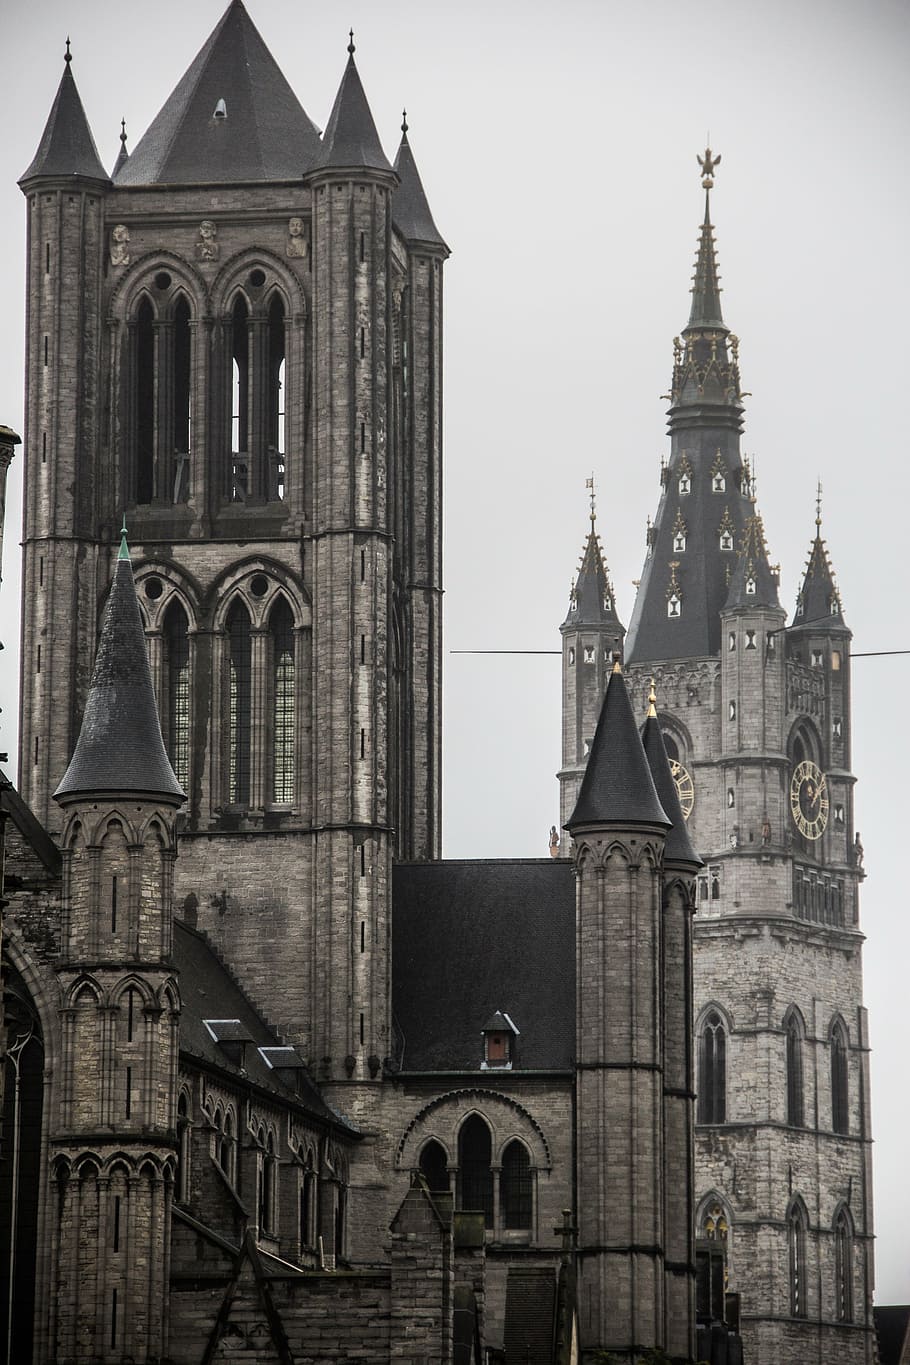 belfry of ghent, belfry tower, church, church tower, architecture